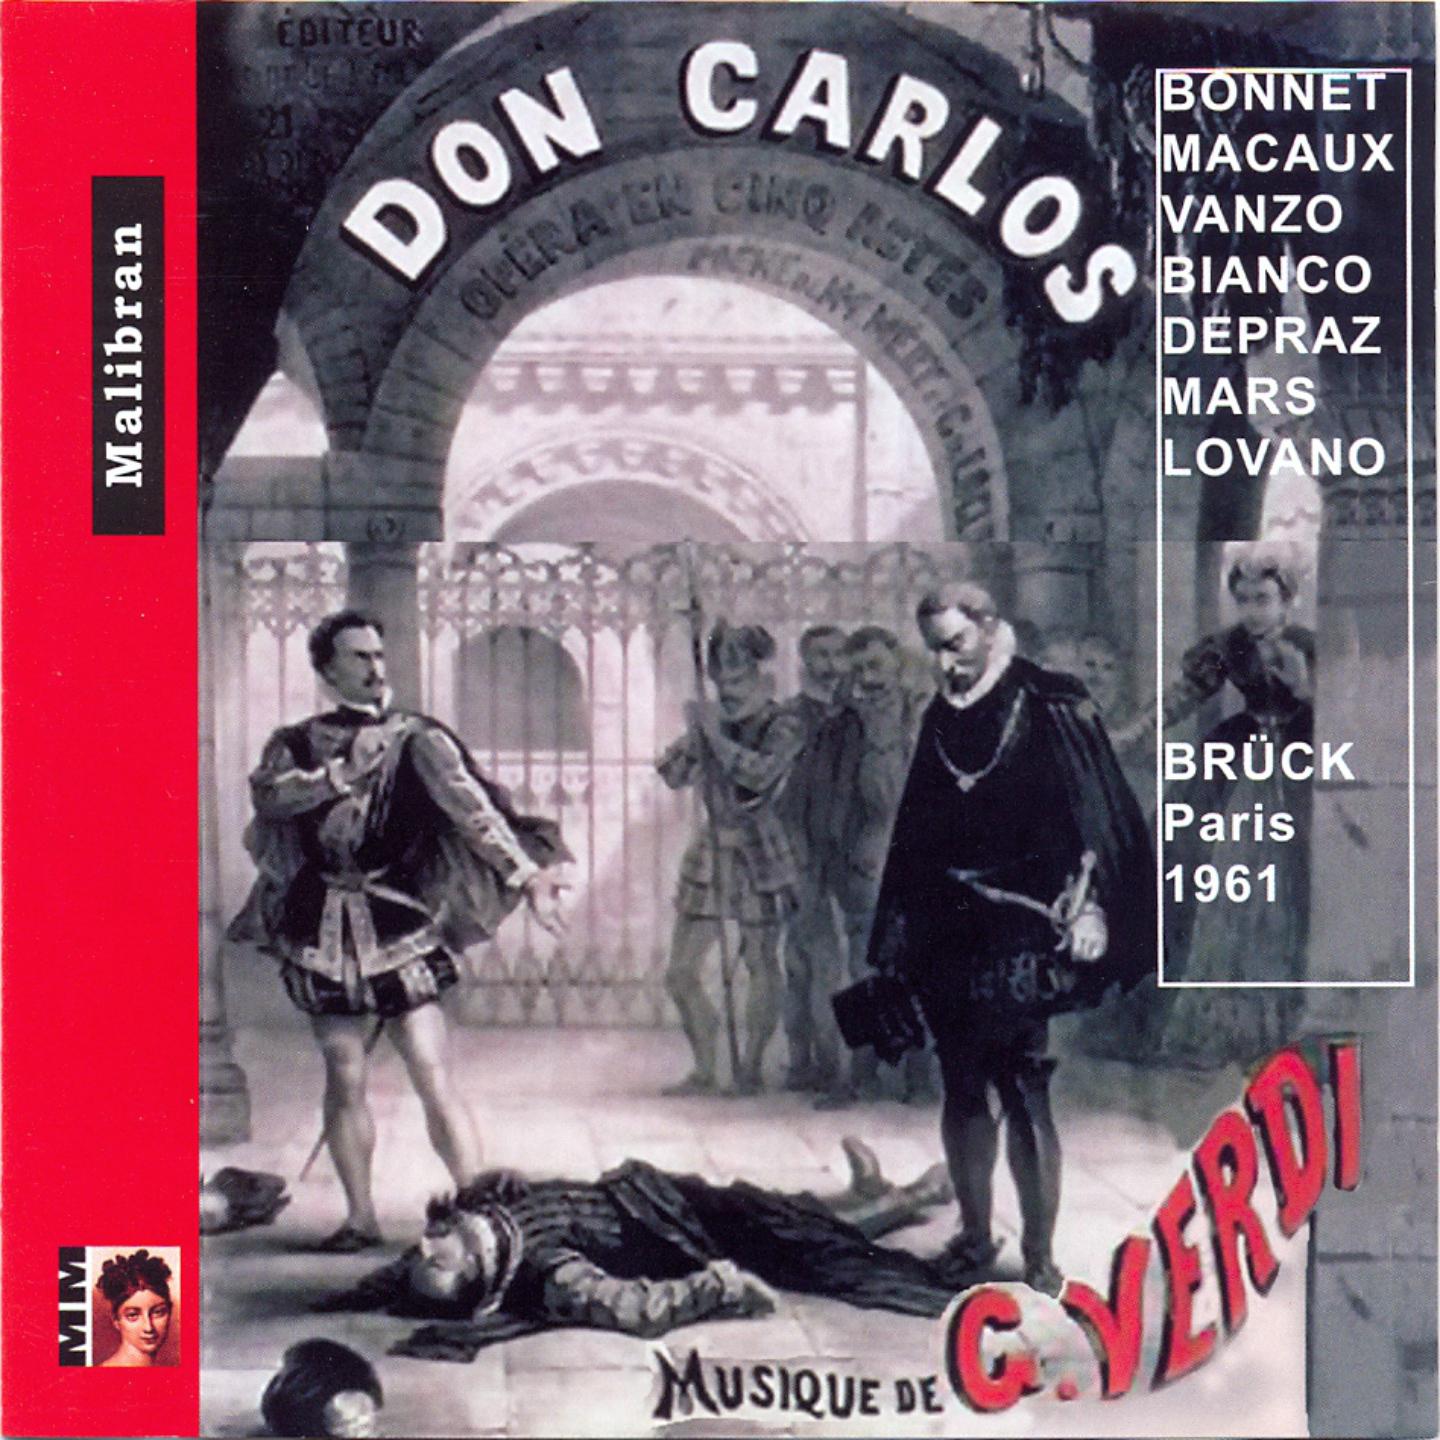 Don Carlos, Act III: Carlos, e coute